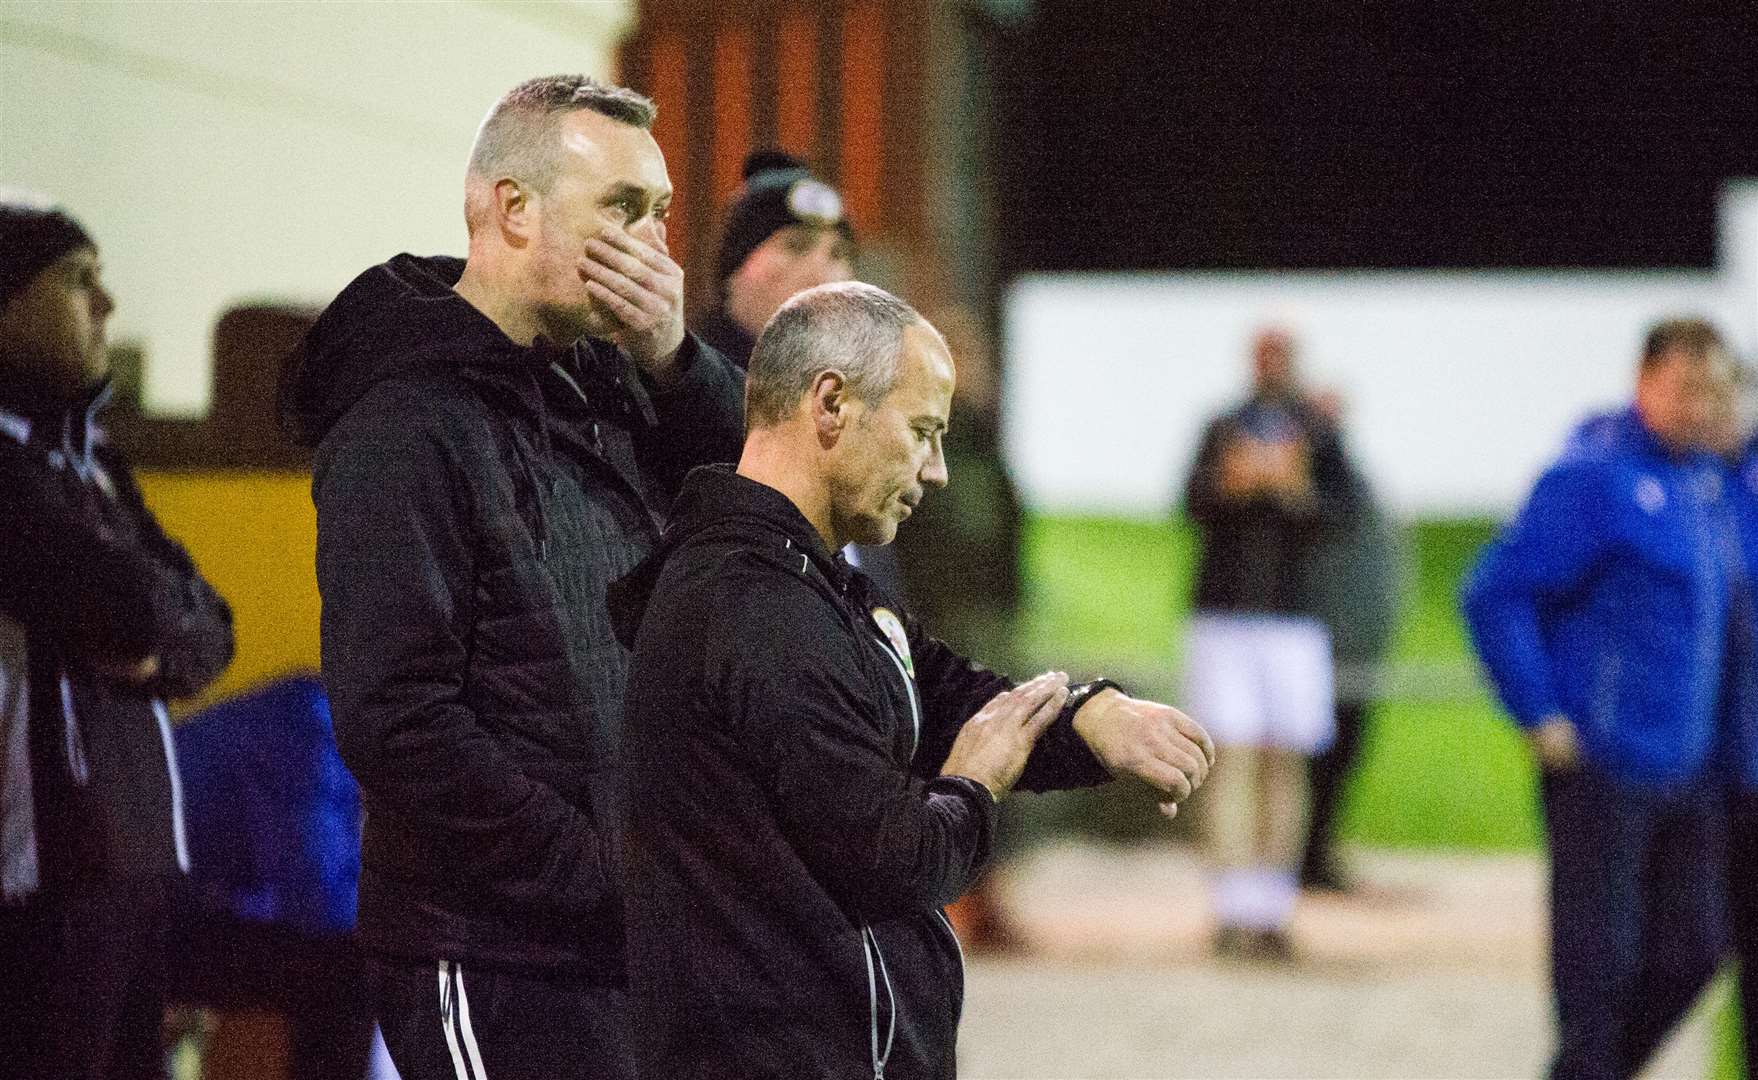 Gordon Connelly checking his watch after the second goal, as a shocked Steven Macdonald looks on. Picture: Becky Saunderson